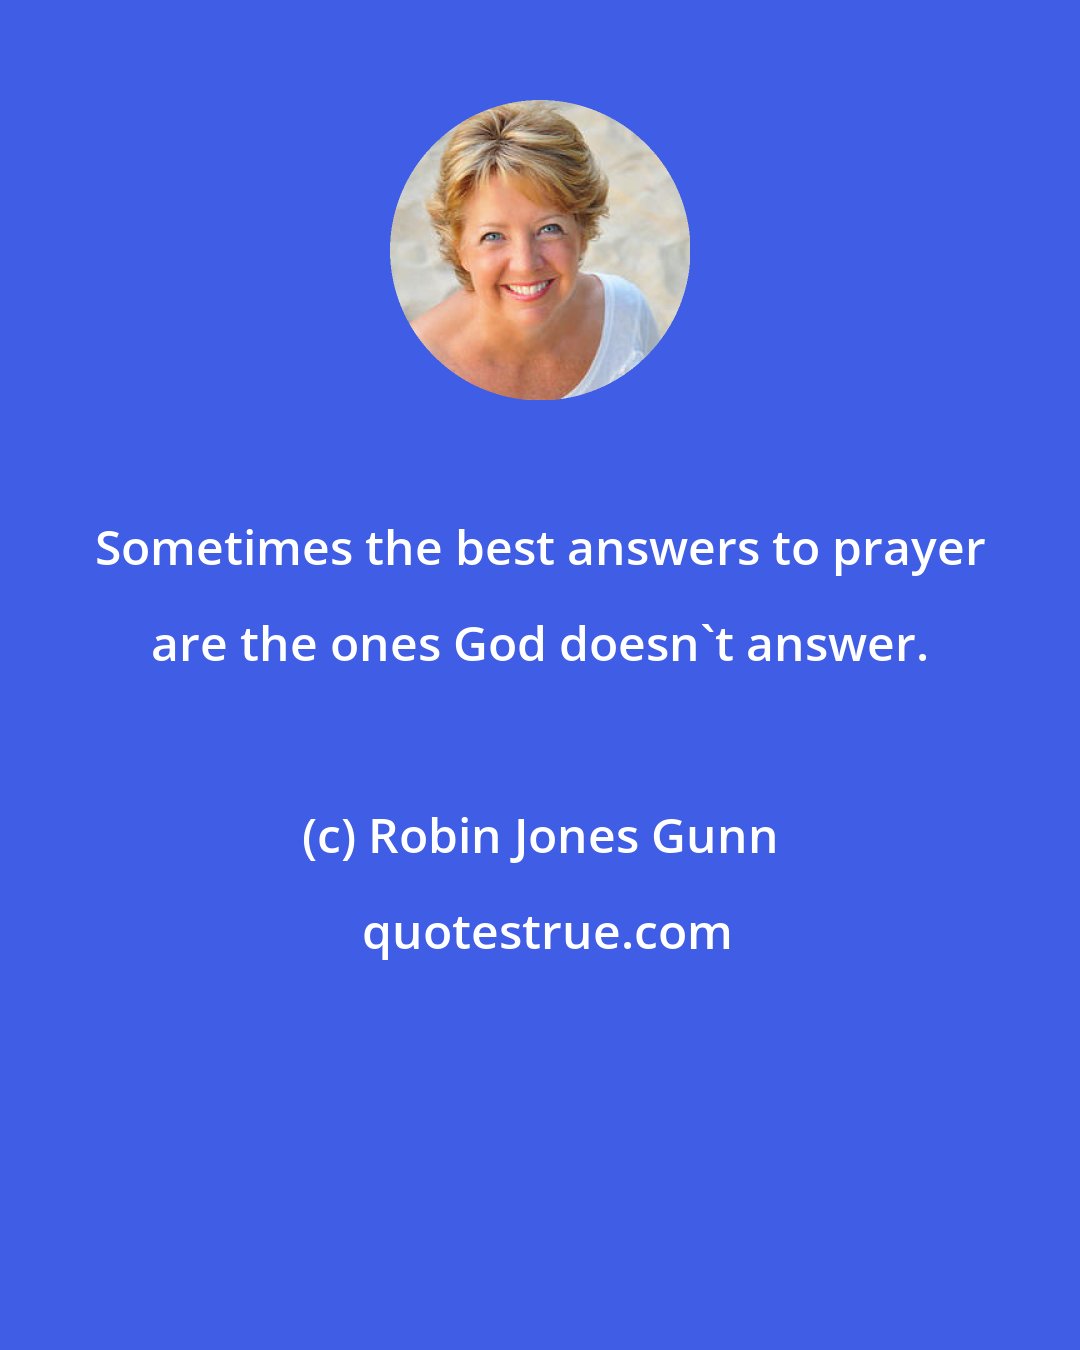 Robin Jones Gunn: Sometimes the best answers to prayer are the ones God doesn't answer.